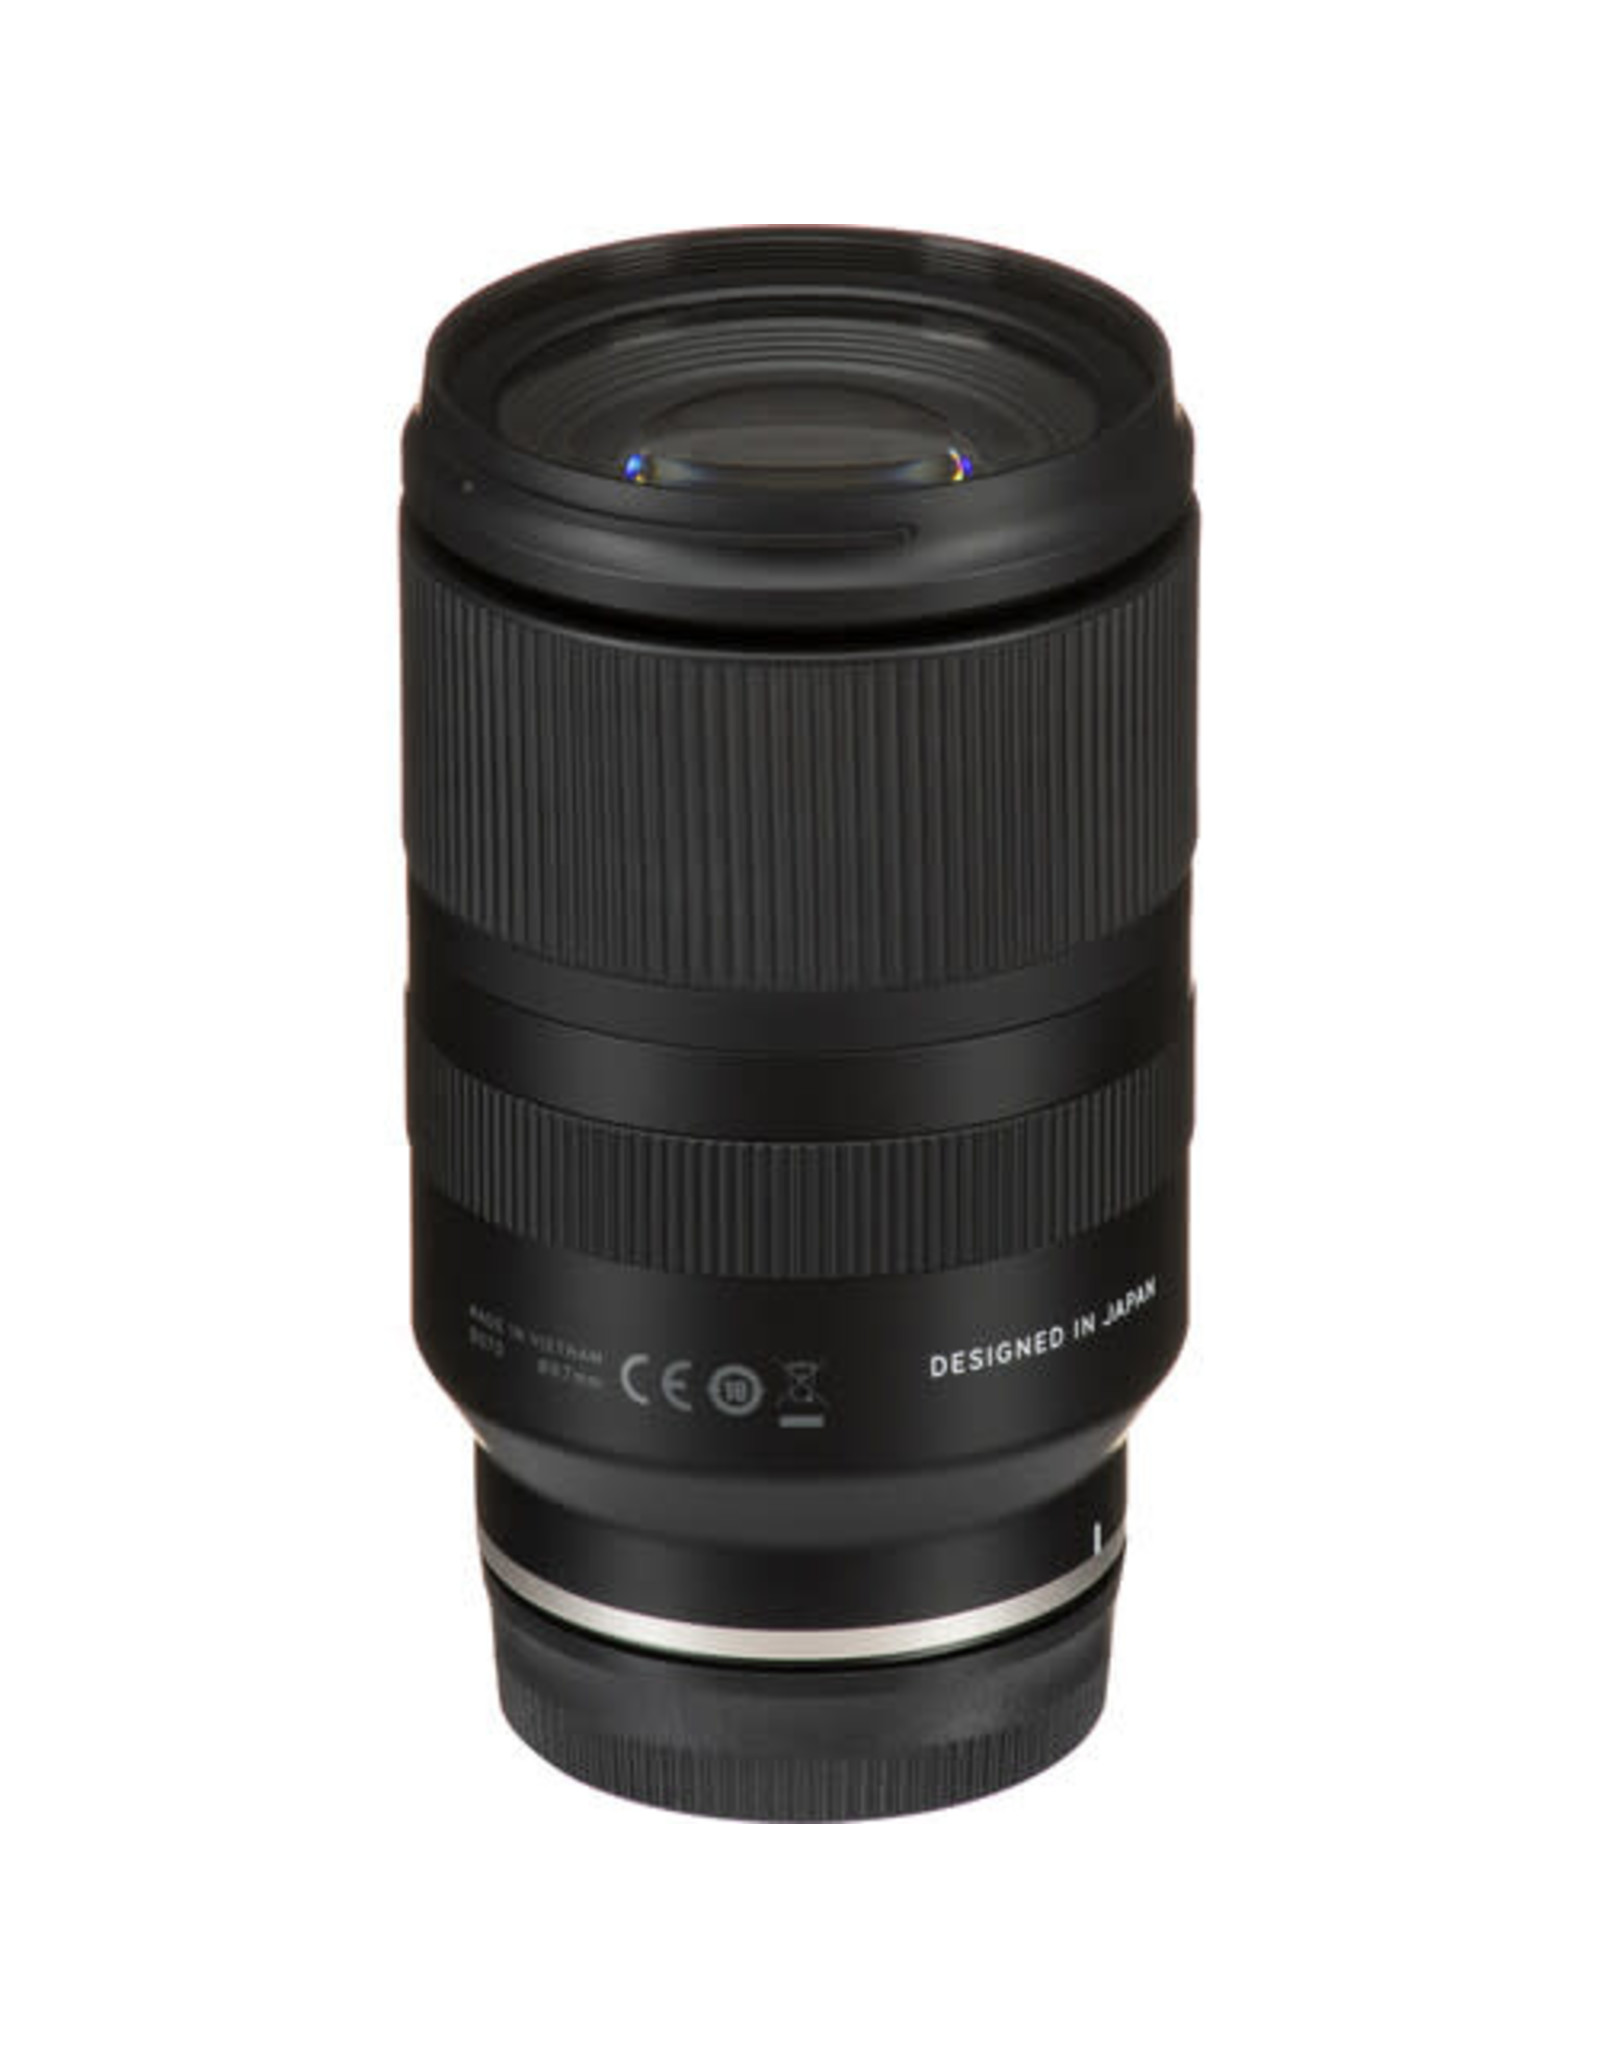 Tamron Tamron 17-70mm f/2.8 Di III-A VC RXD Lens for Sony E